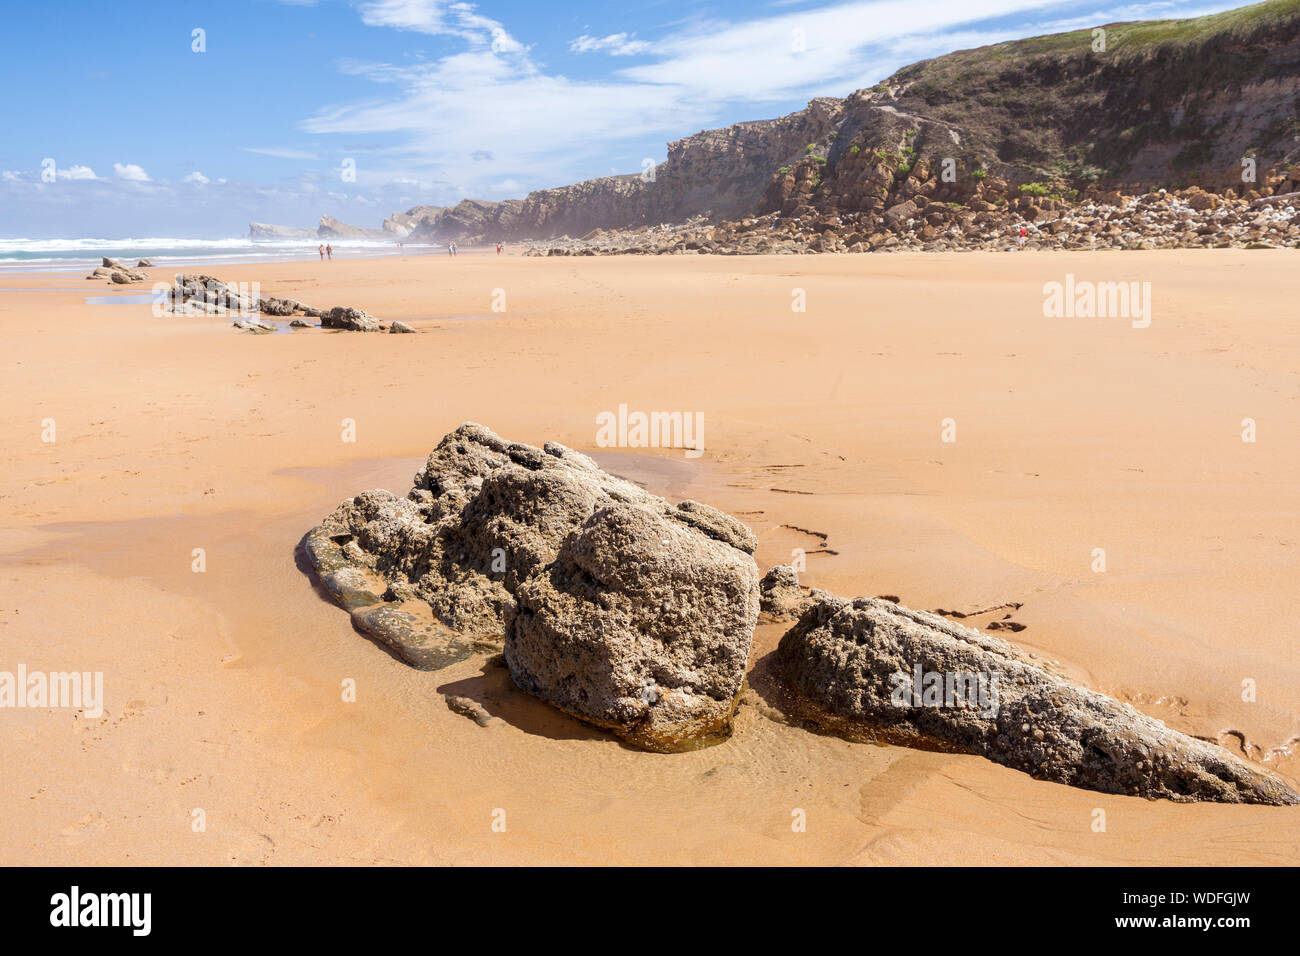 Natural Park of the Dunes of Liencres, Liencres, Cantabria, Spain Stock Photo